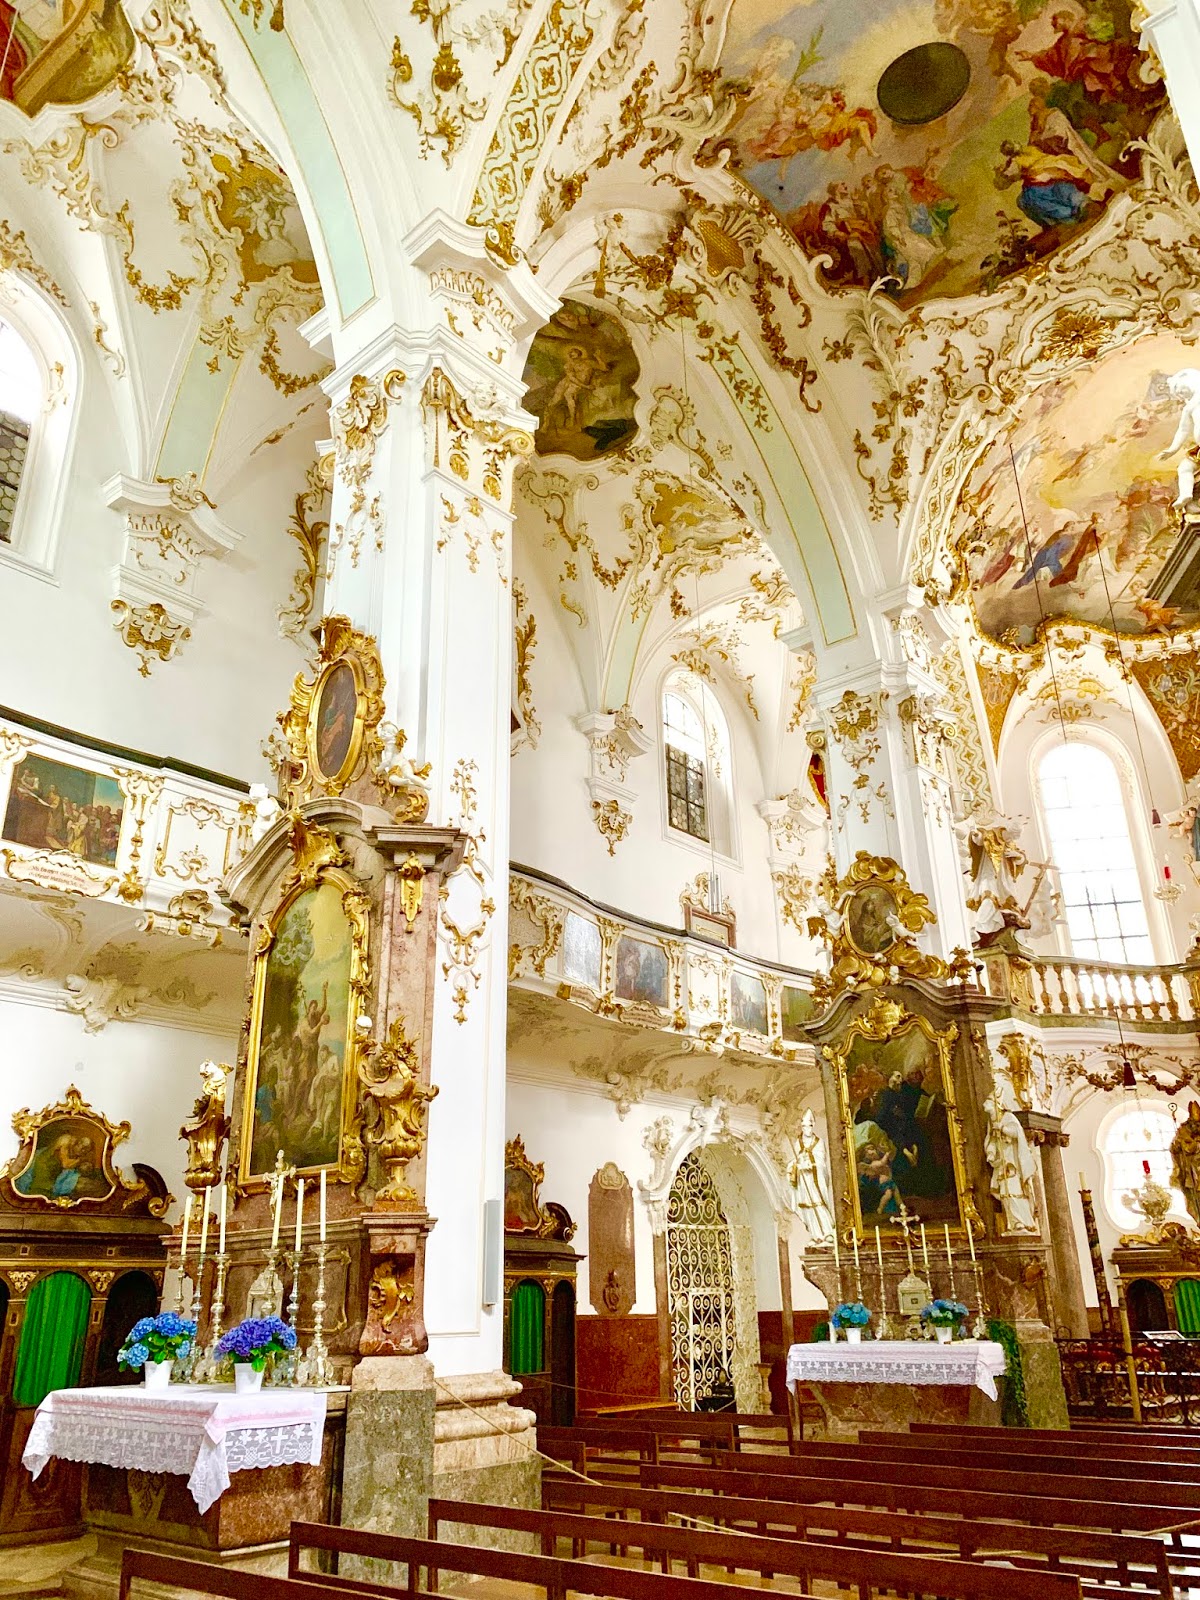 andechs-monastery-pilgrimage-church-lolo-s-extreme-cross-country-rv-trips